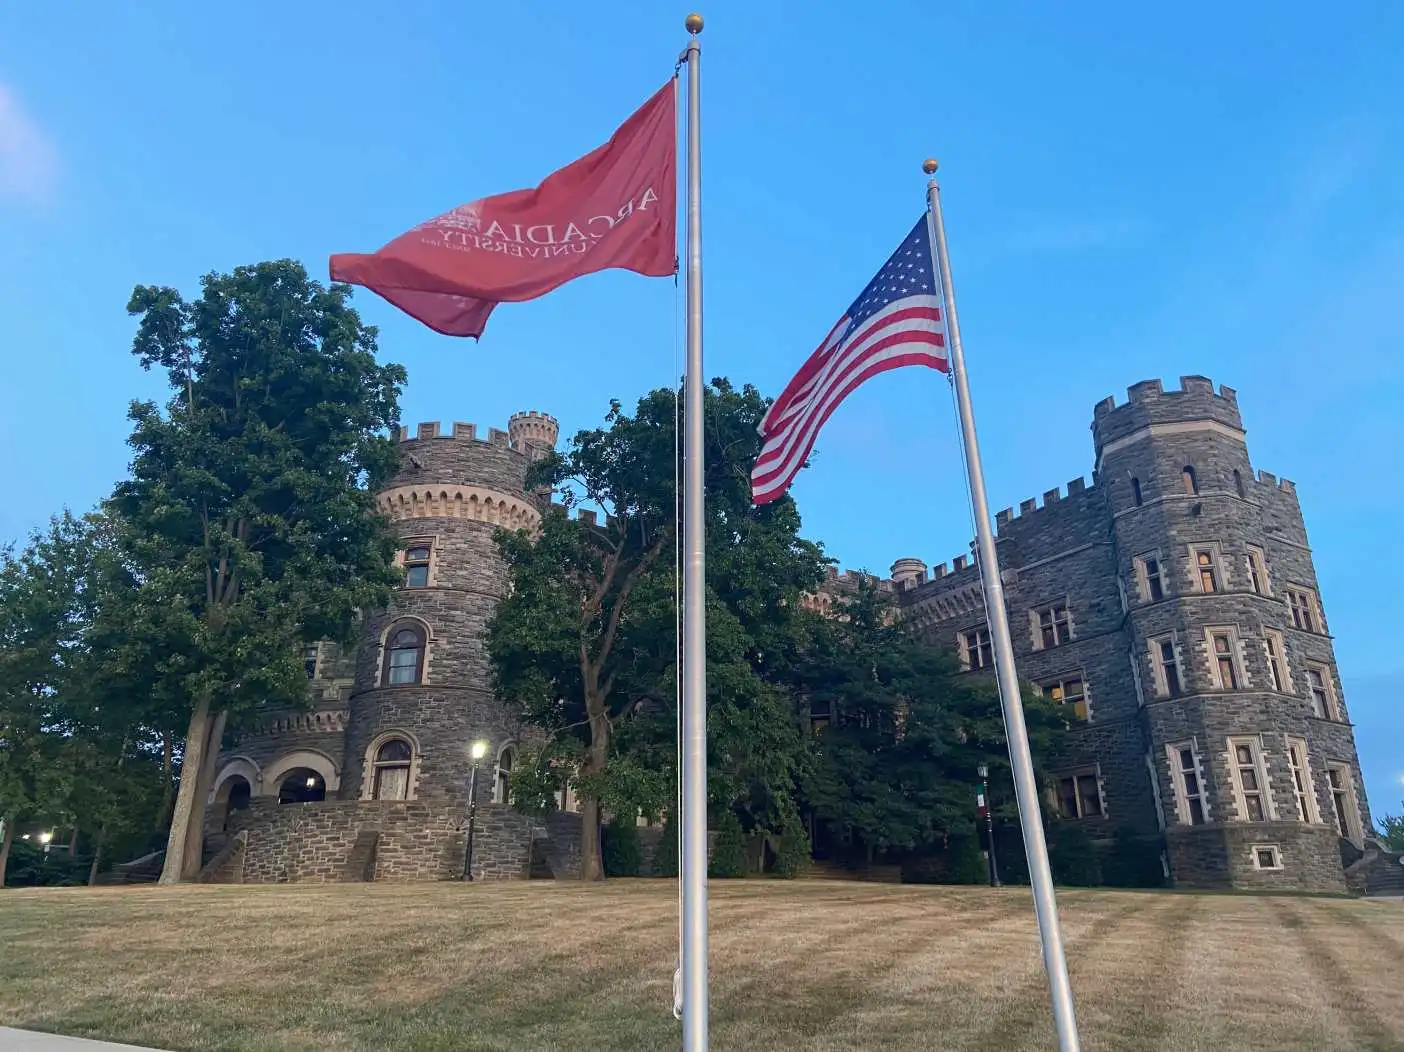 The U.S. flag and the Arcadia flag in front of Grey Towers Castle.